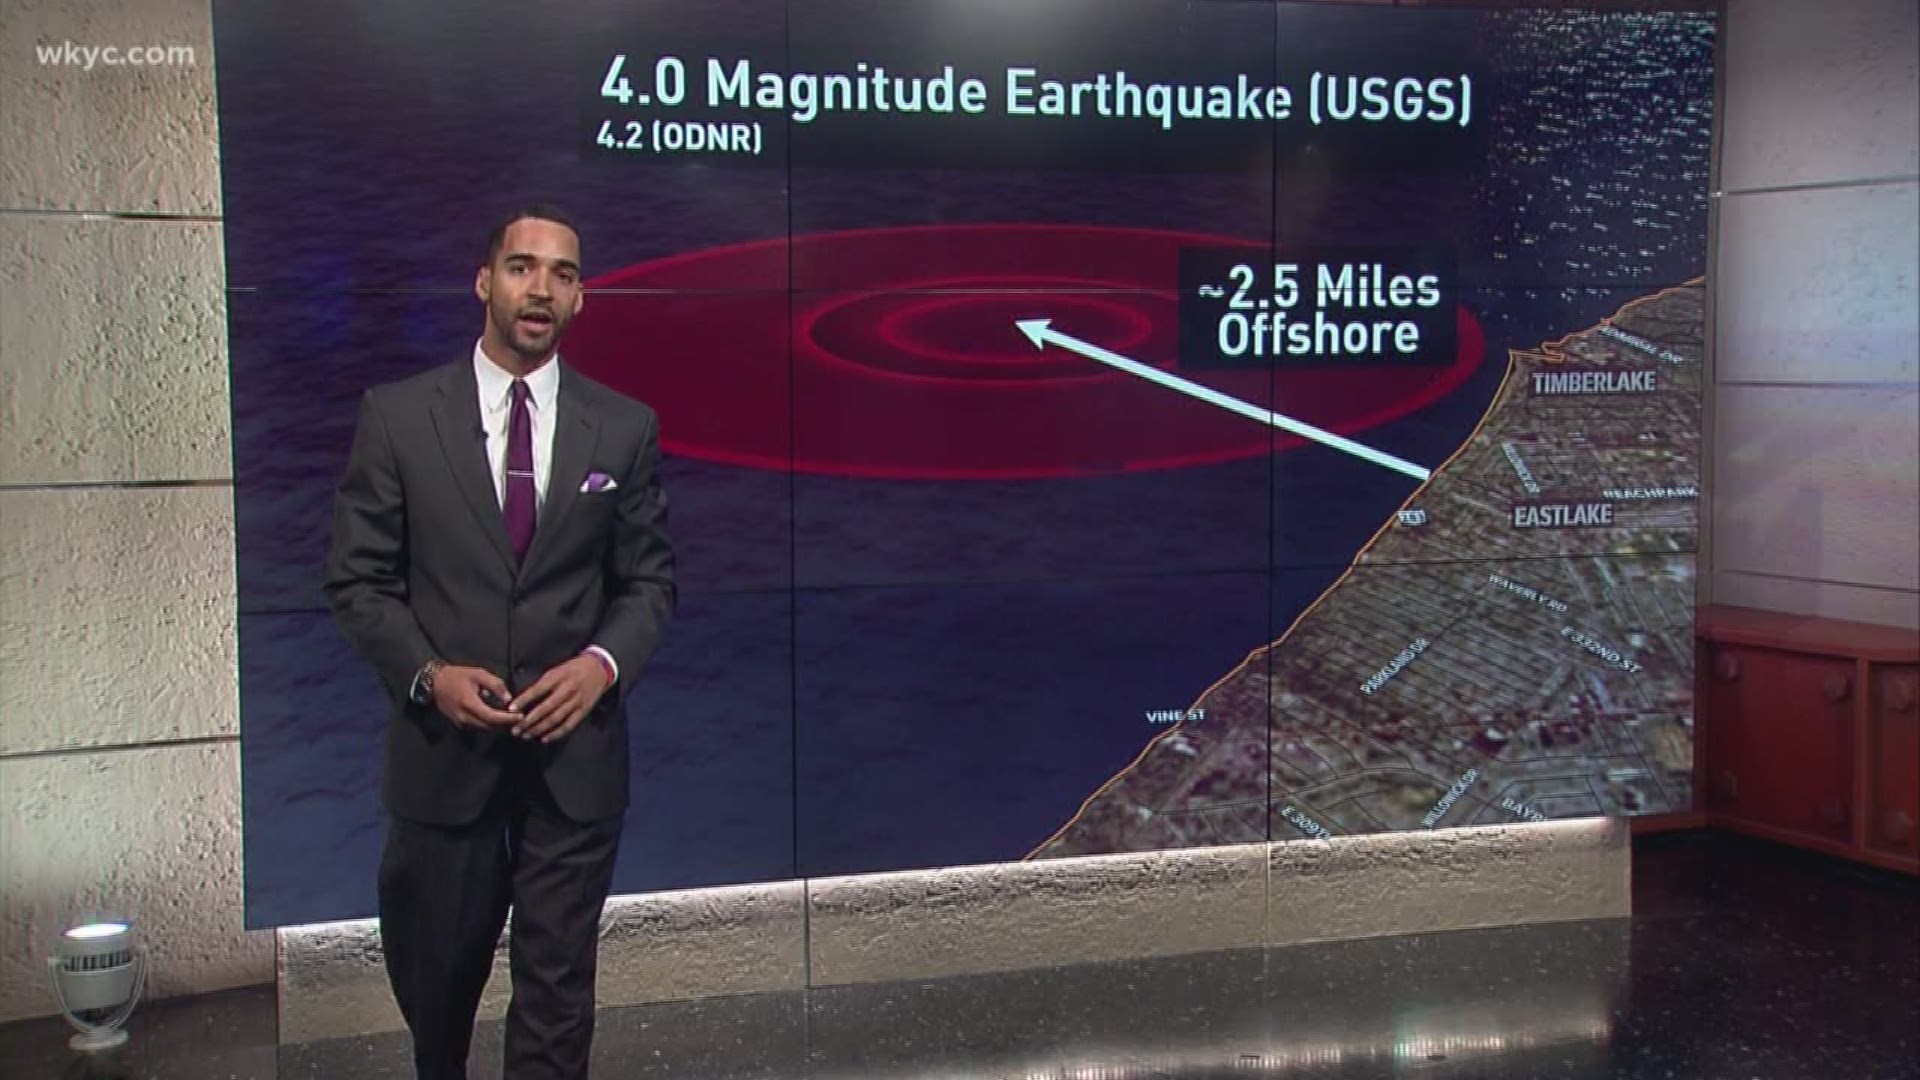 According to the U.S. Geological Survey, the quake had a magnitude of 4.0.